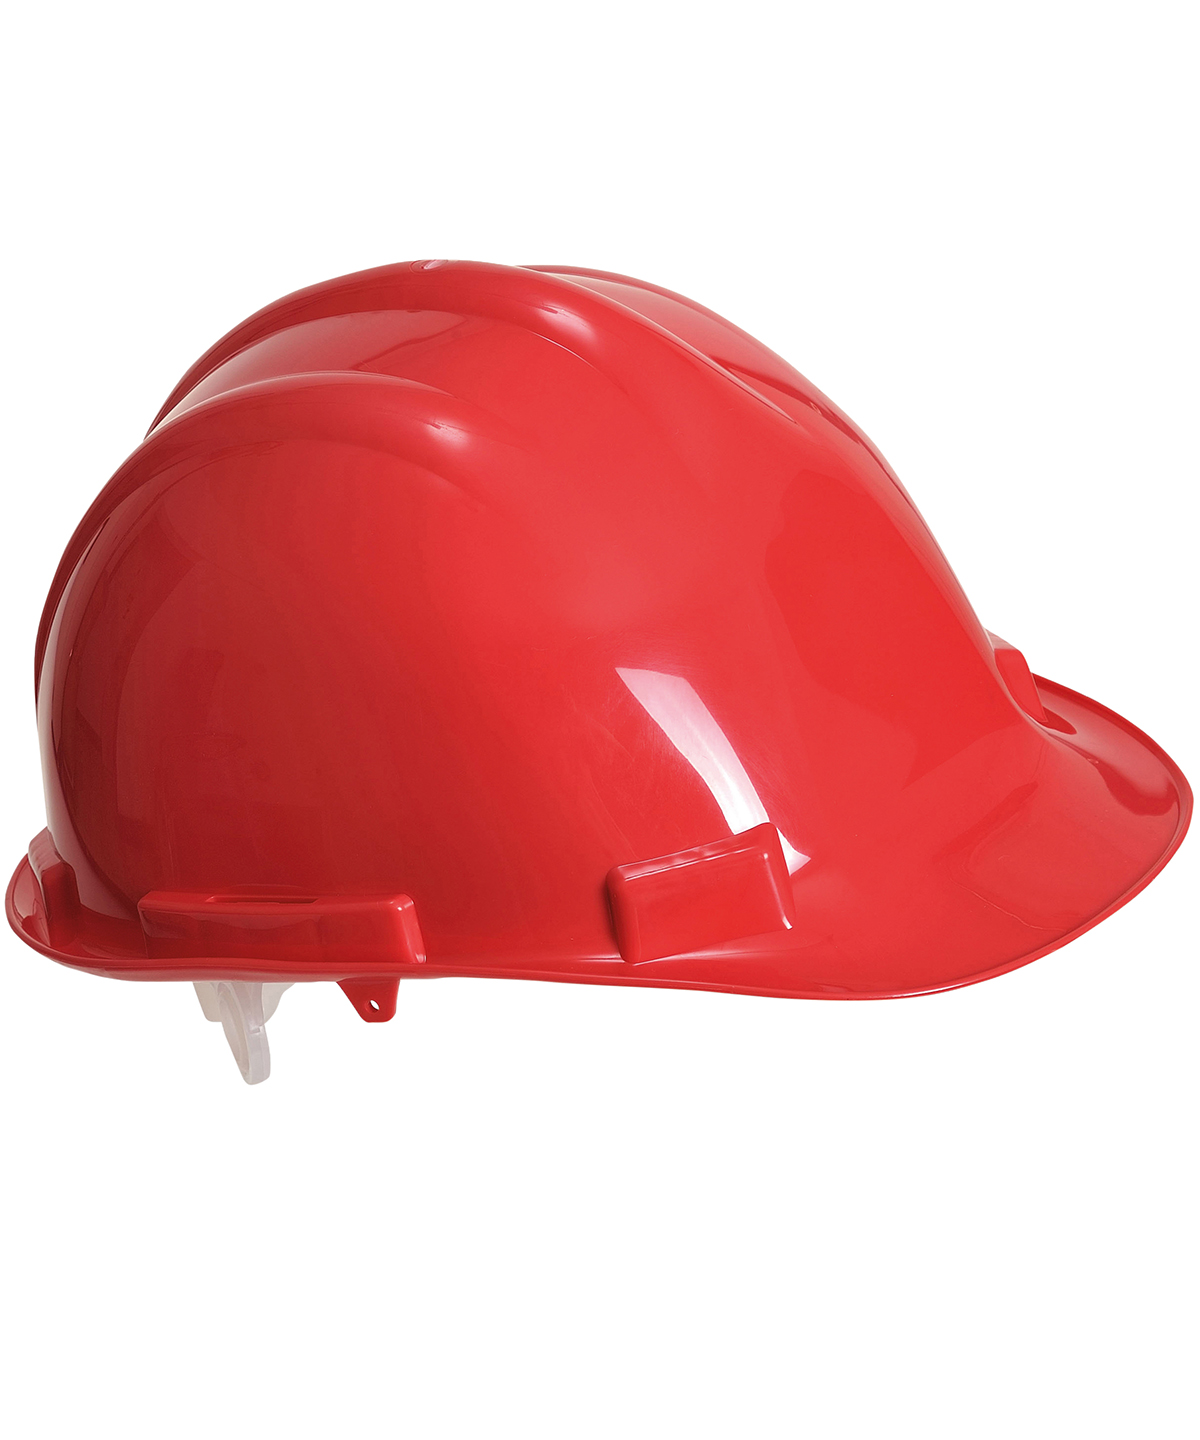 Expertbase Safety Helmet (Pw50) Red Size One Size